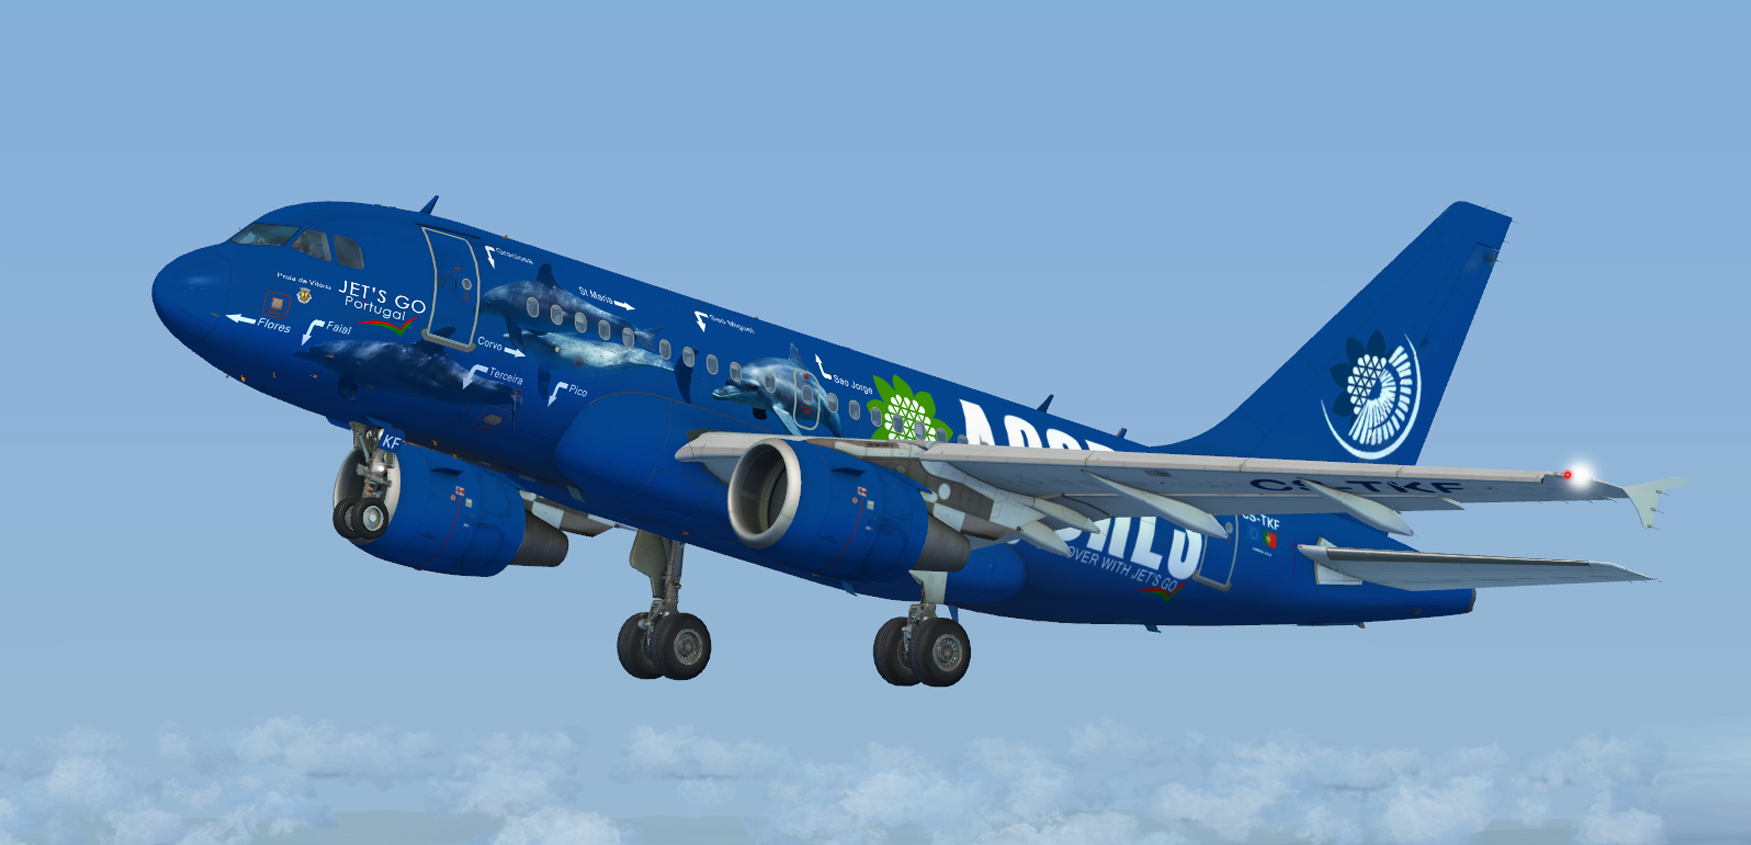 More information about "Airbus A318 CFM Jets Go CS-TKF Special Edition ACORES"